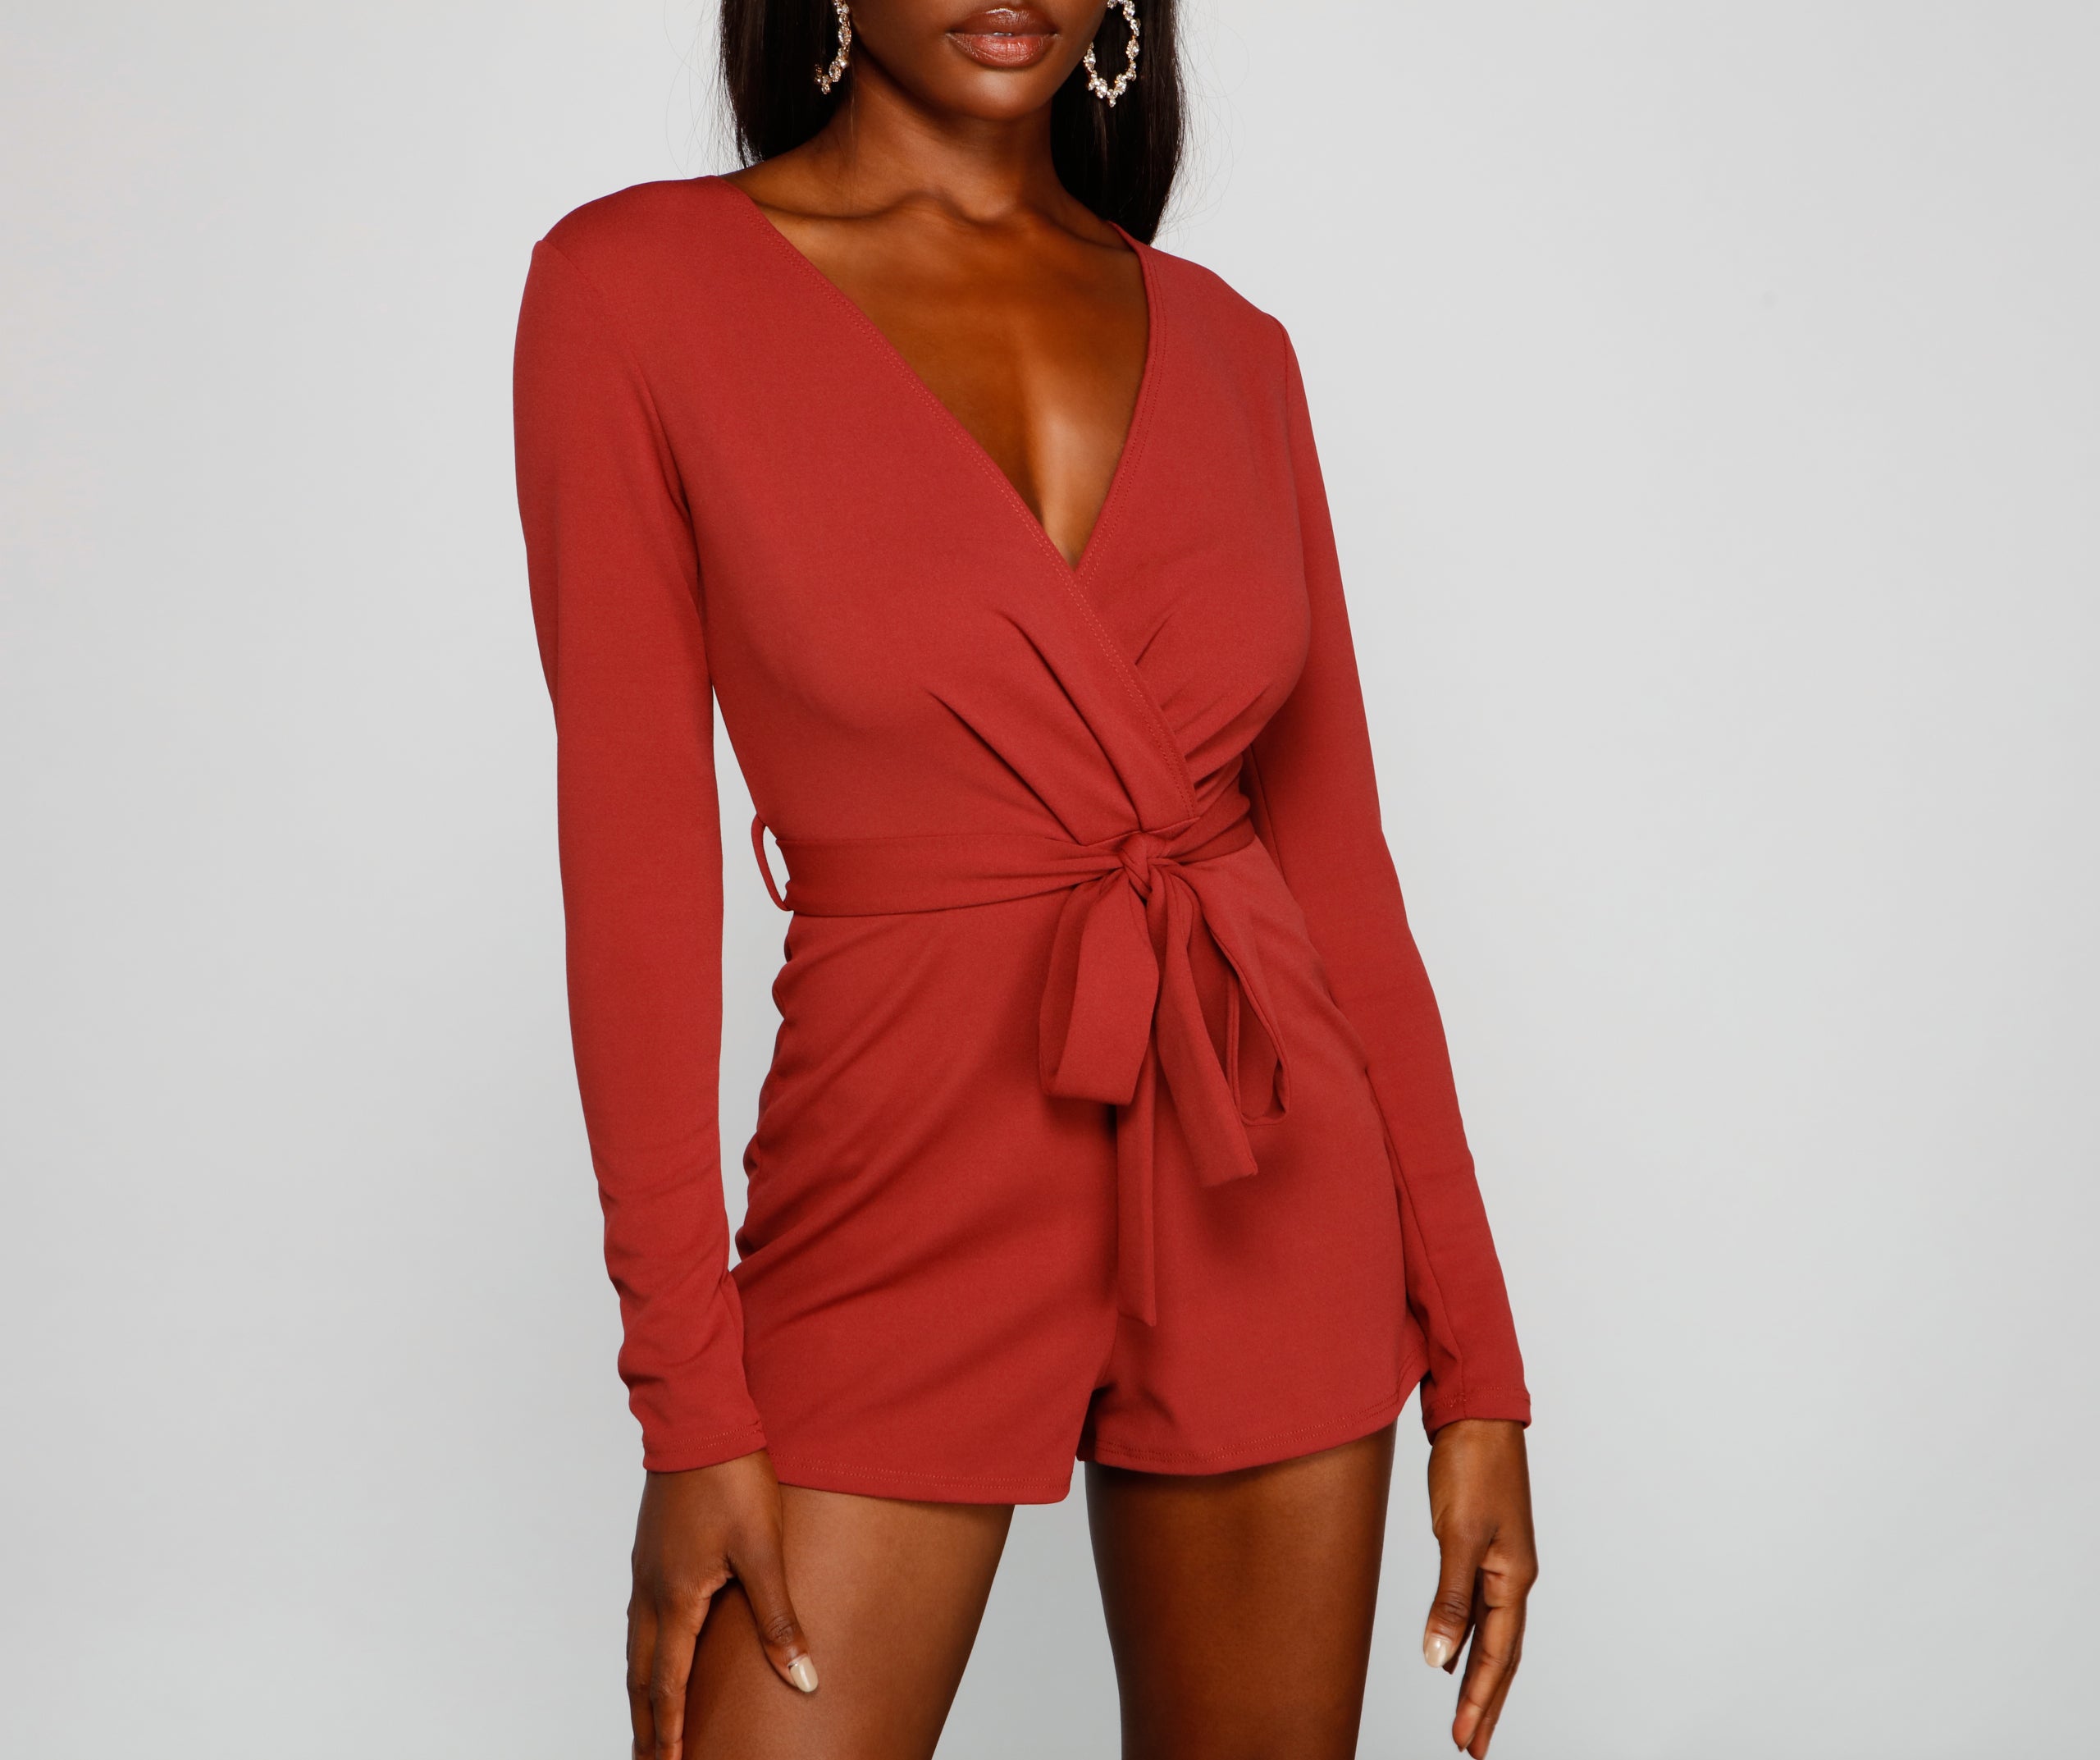 Wrapped In Glamour Surplice Romper